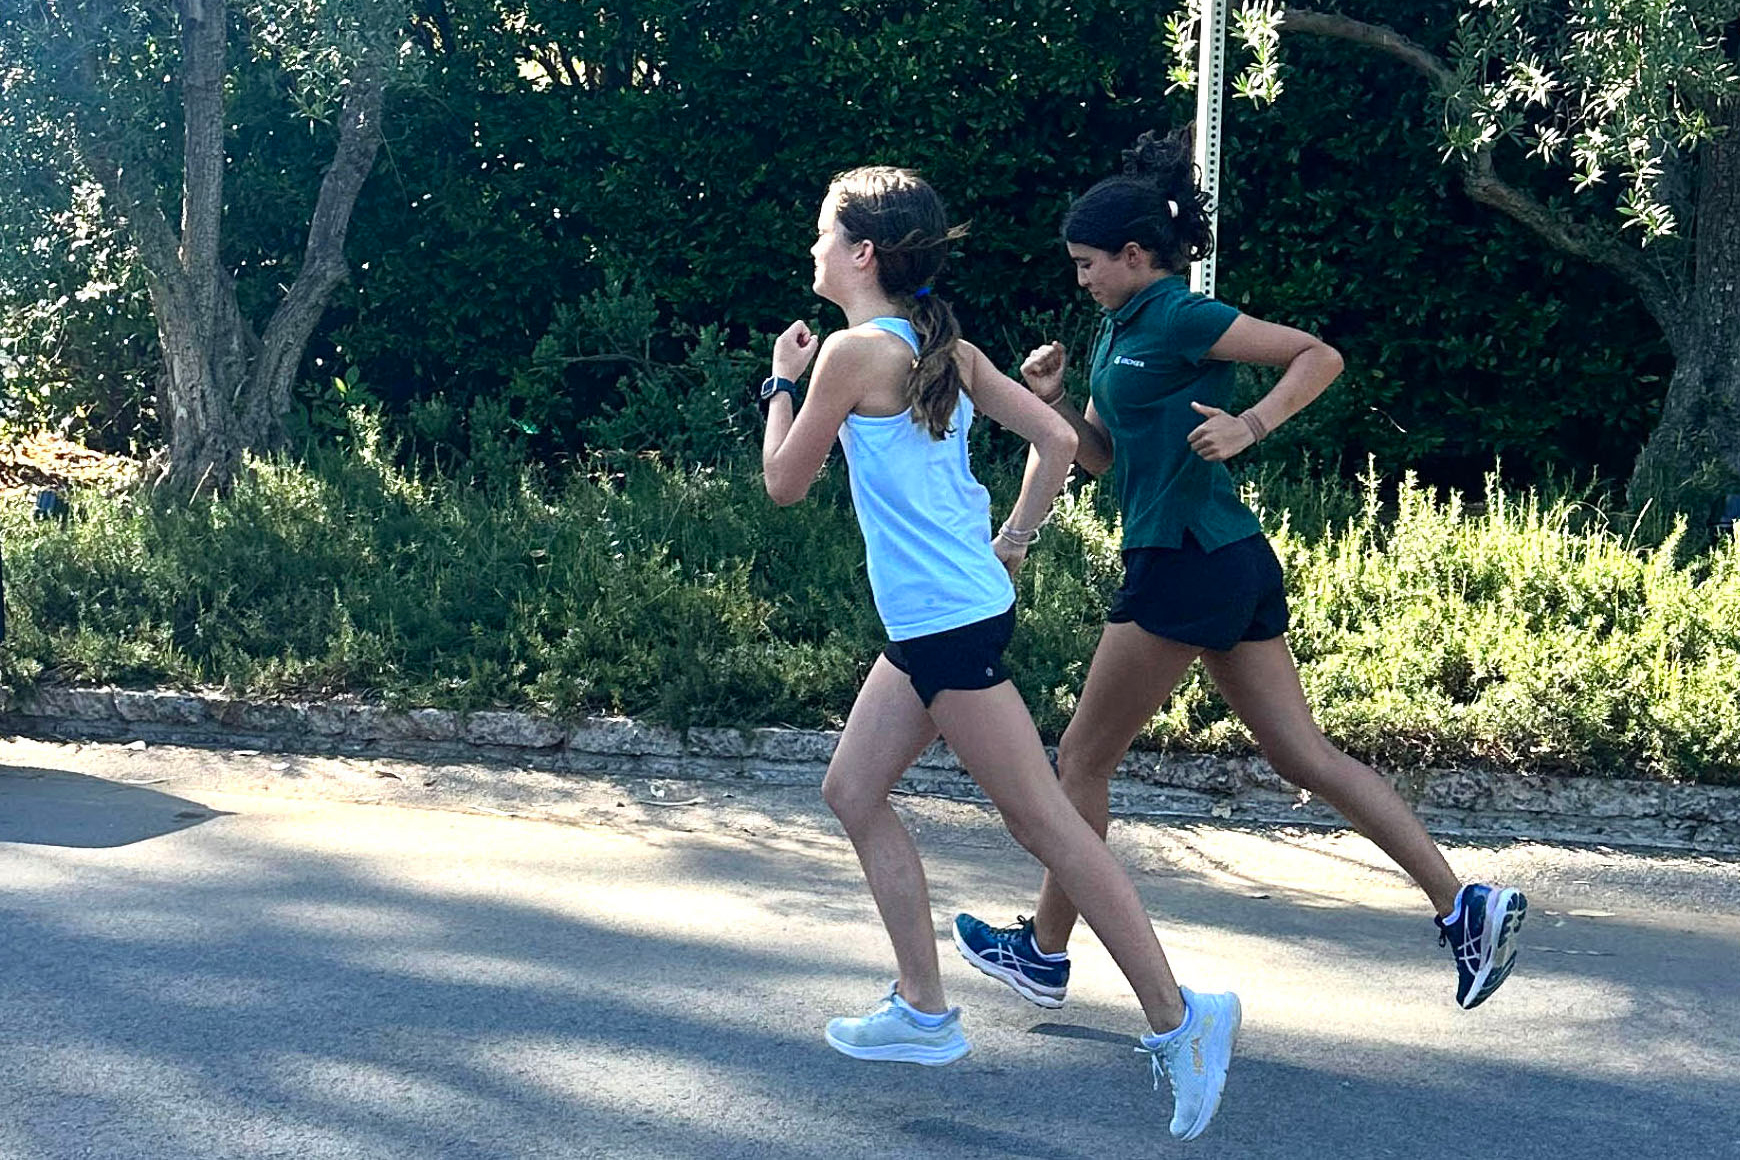 Seventh graders Zoe Butler and Isabel Kromwyk run side by side on a sunny afternoon during cross country practice. Middle school cross country coach Kiaira Bostic said they are both determined athletes, and she looks forward to seeing them become stronger runners this season. 